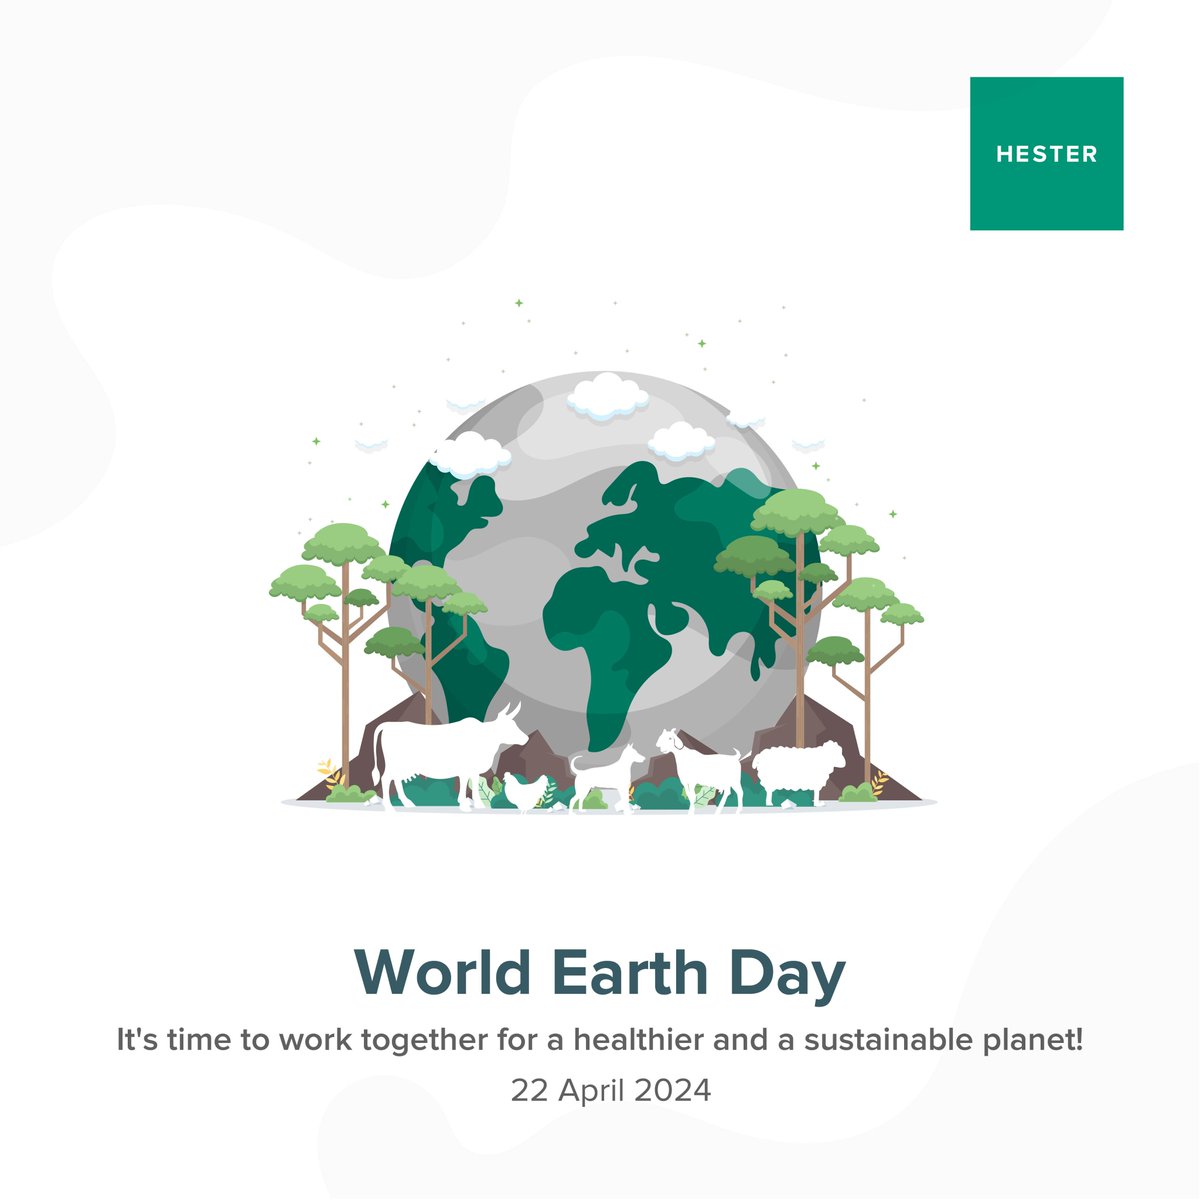 This World Earth Day, let's ensure a greener and a healthier world by stepping up as stewards of our planet's well-being.

#Hester #Earthday #sustainability #environment #climateaction #protectourplanet #naturelovers #ecoconscious #planetcare #climatechange #actonclimate